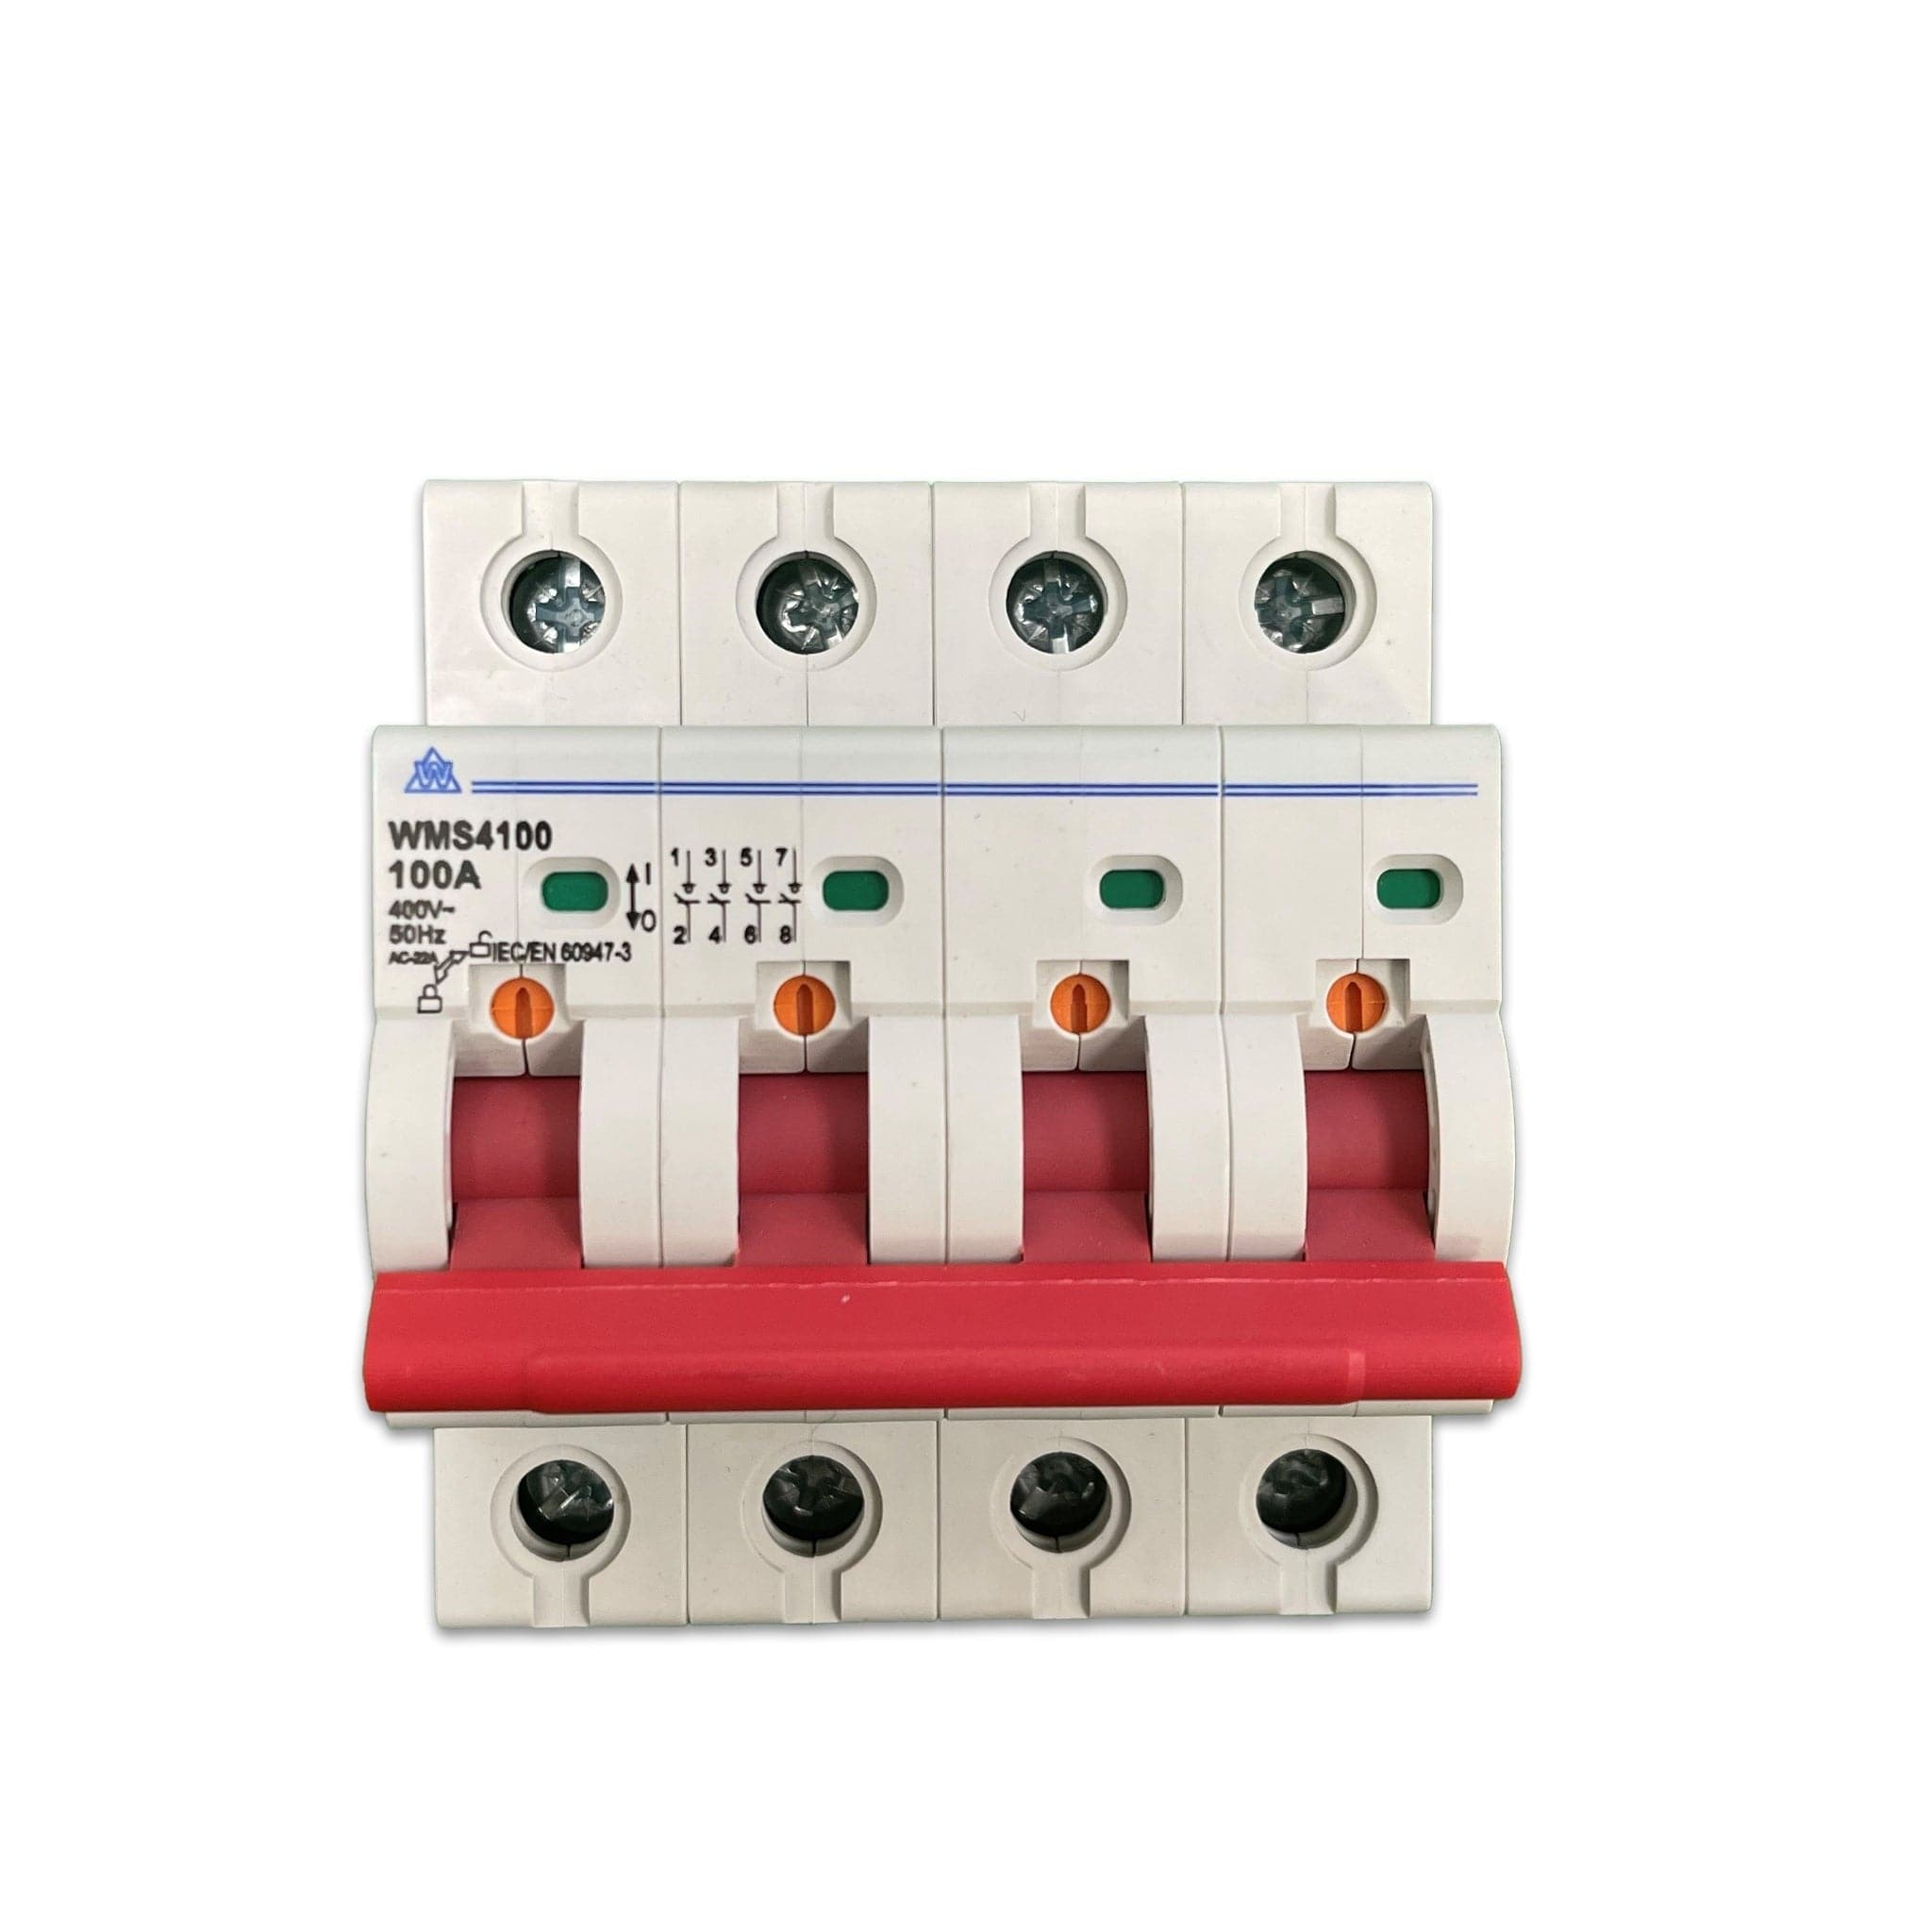 Rexton 35A 3-Pole Isolator - Buy Online for Electrical Control and Safety at Supply Master Power Management & Protection Buy Tools hardware Building materials